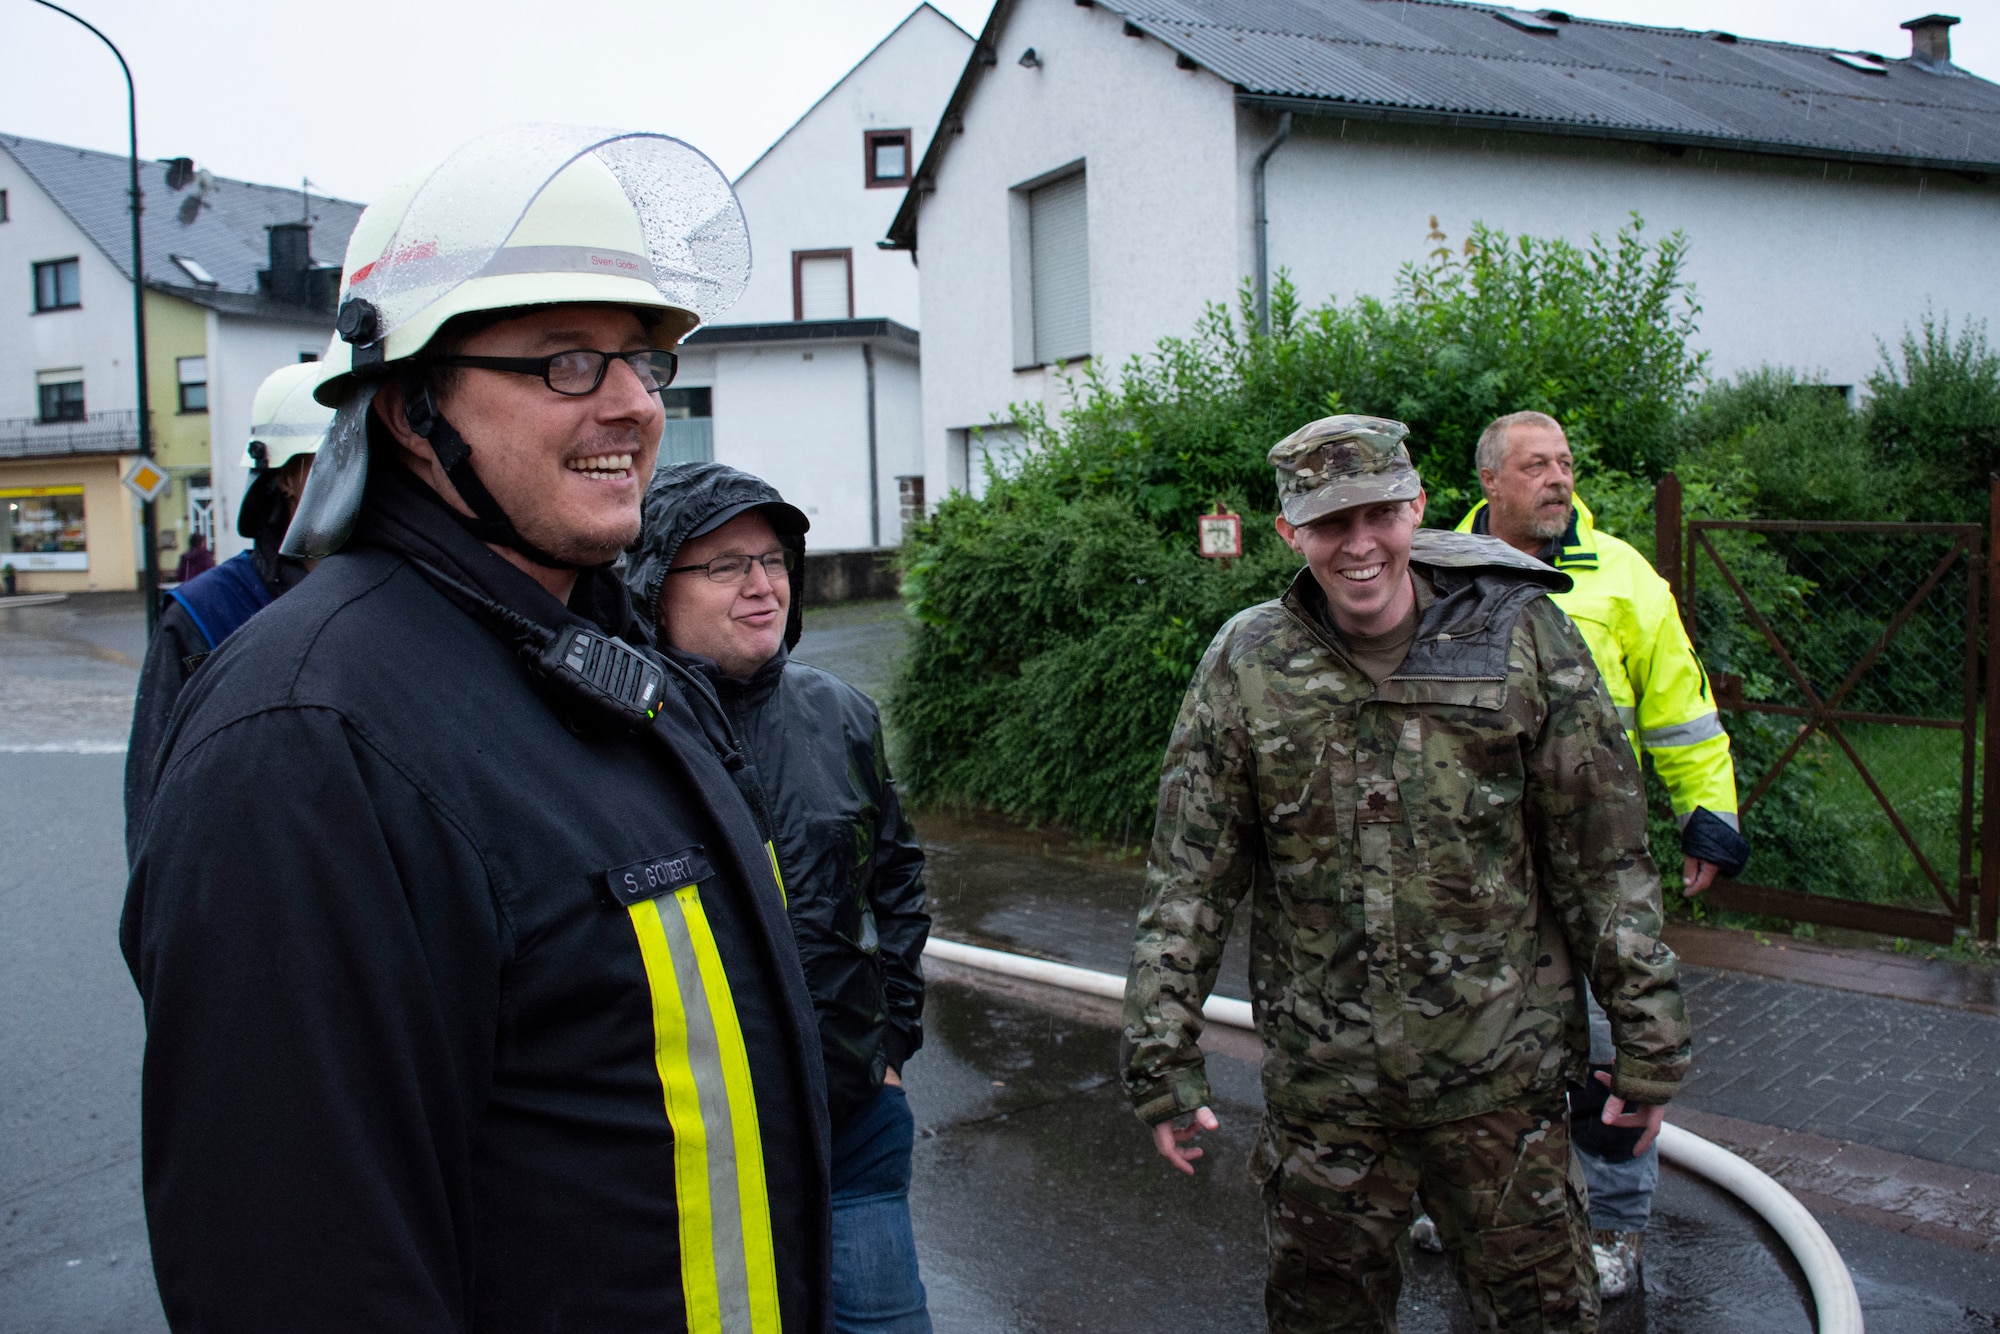 U.S. Air Force Maj. Daniel Blomberg, 52nd Civil Engineer Squadron Operations Flight commander from Spangdahlem Air Base, Germany (center right), works with German first responders to clear water from local residences in Binsfeld, Germany, July 14, 2021.